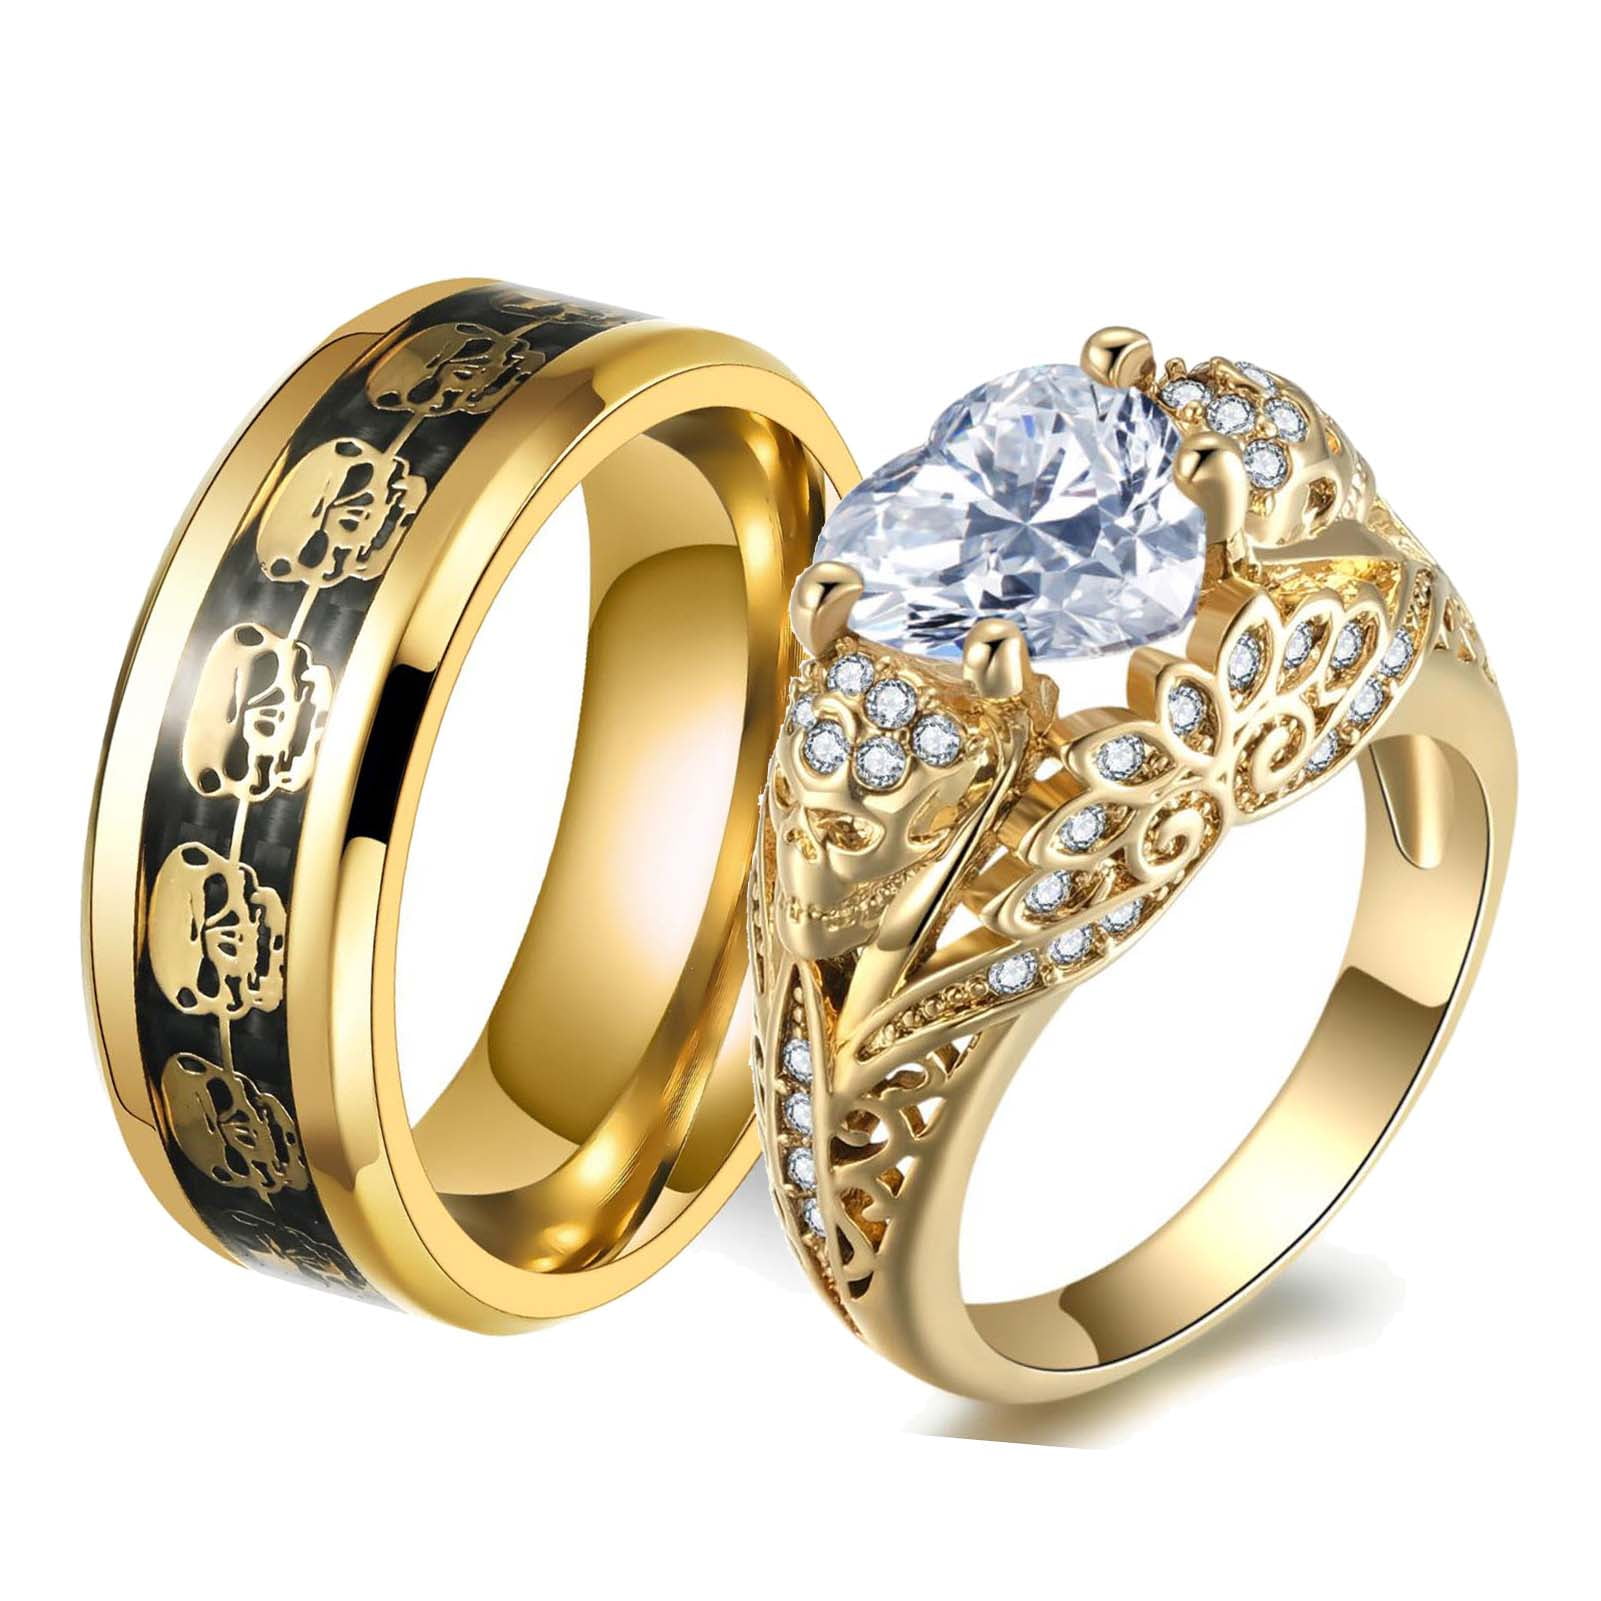 The Willow & Alder - Bark Textured Matching Gold Wedding Ring Set – Rustic  and Main